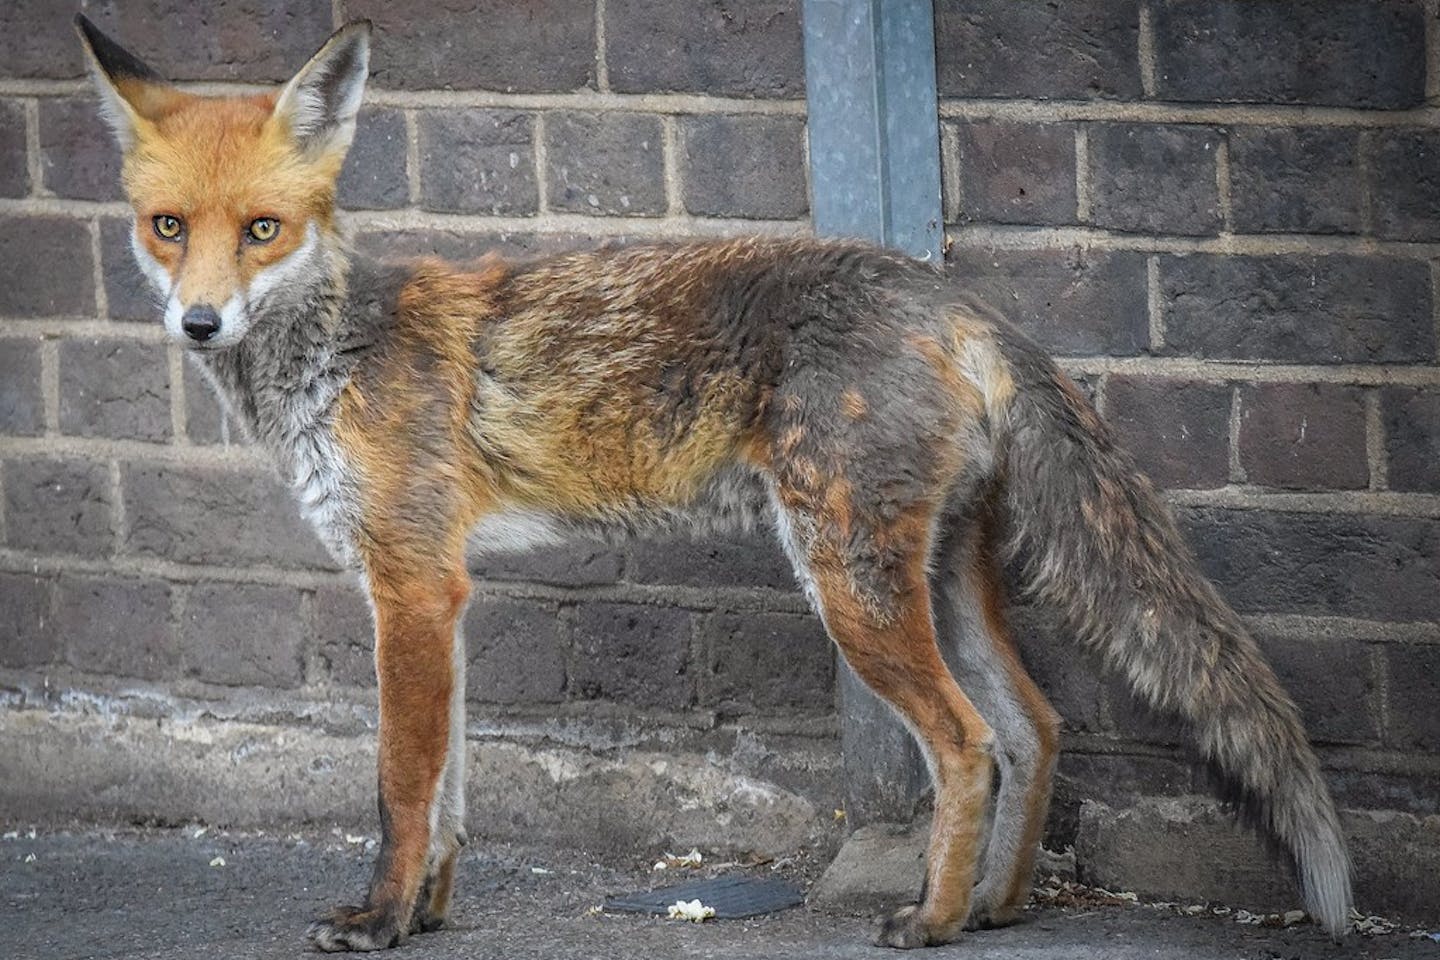 A fox in London city in May 2020.